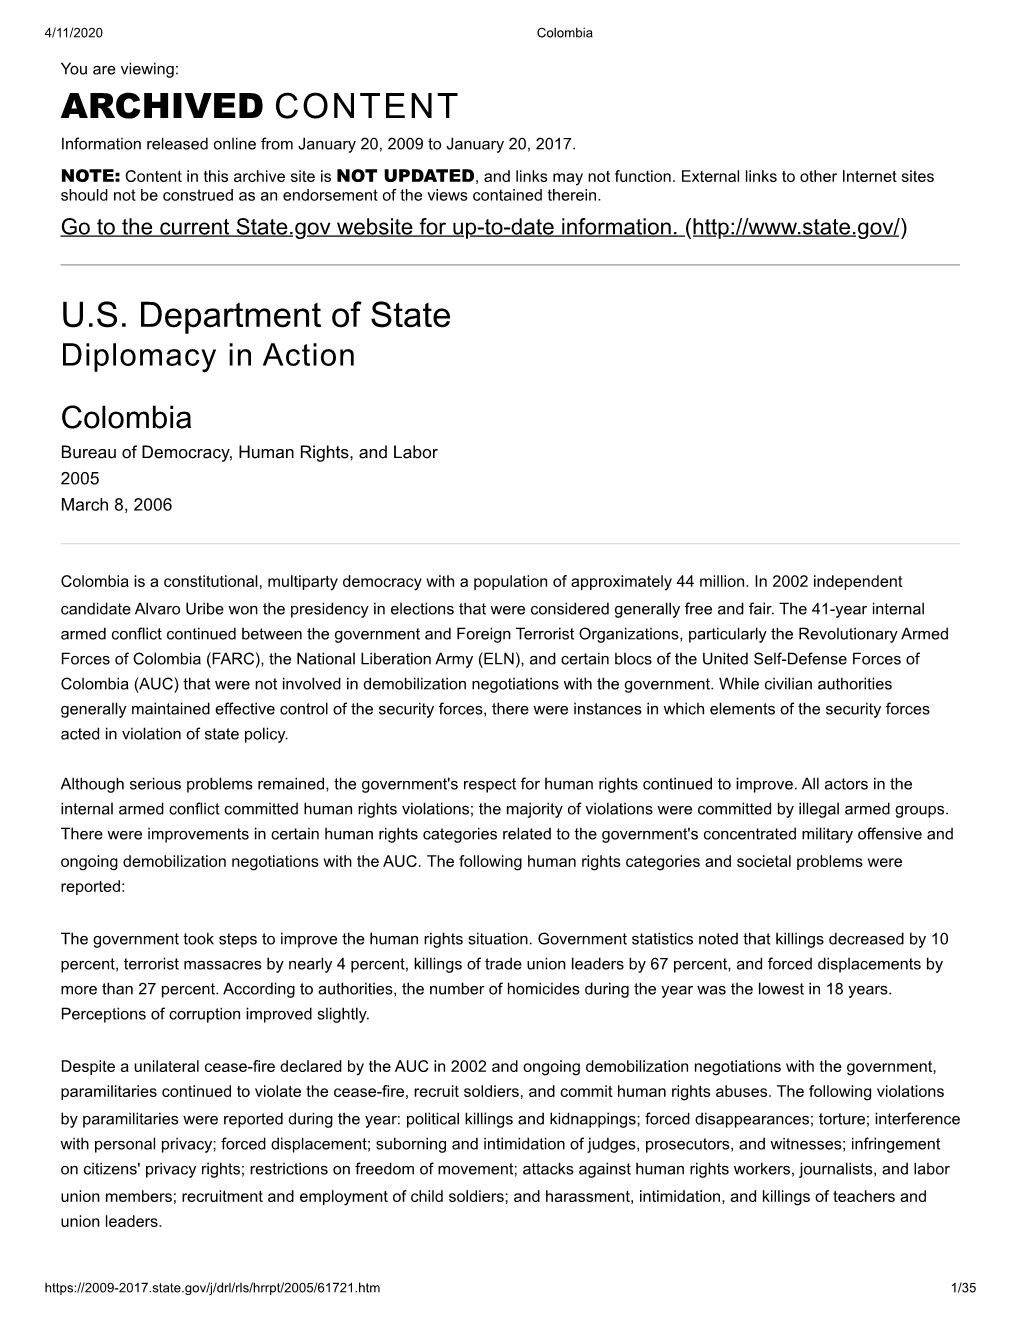 US Department of State ARCHIVED CONTENT